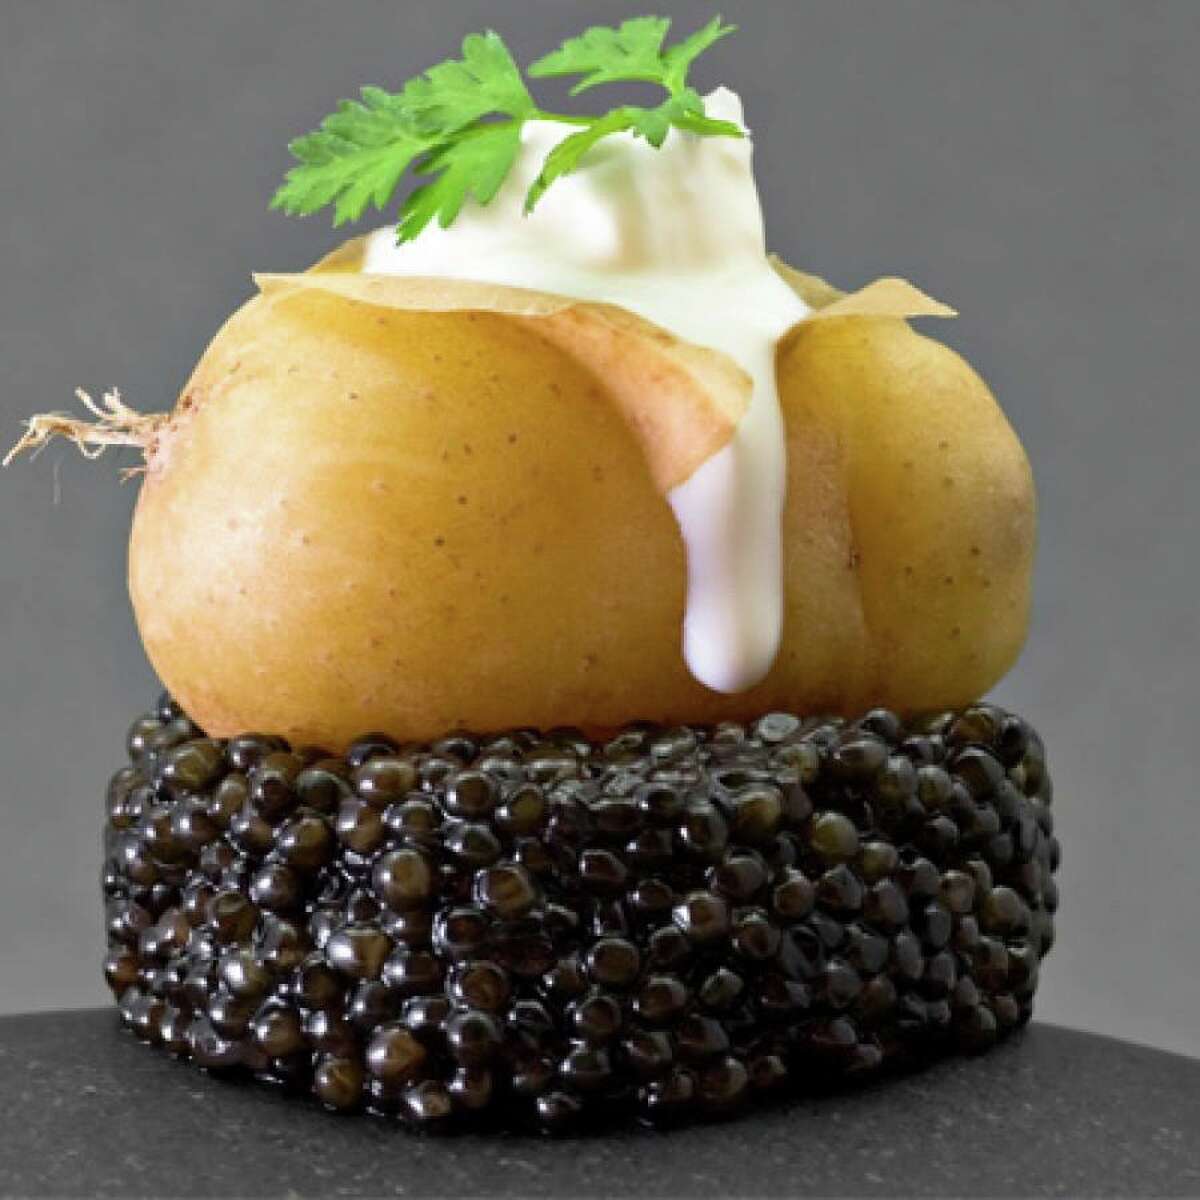 Houston's DR Delicacy, a luxury foods purveyor, has partnered with UberEATS to deliver items such as caviar, truffles and foie gras using the popular app.